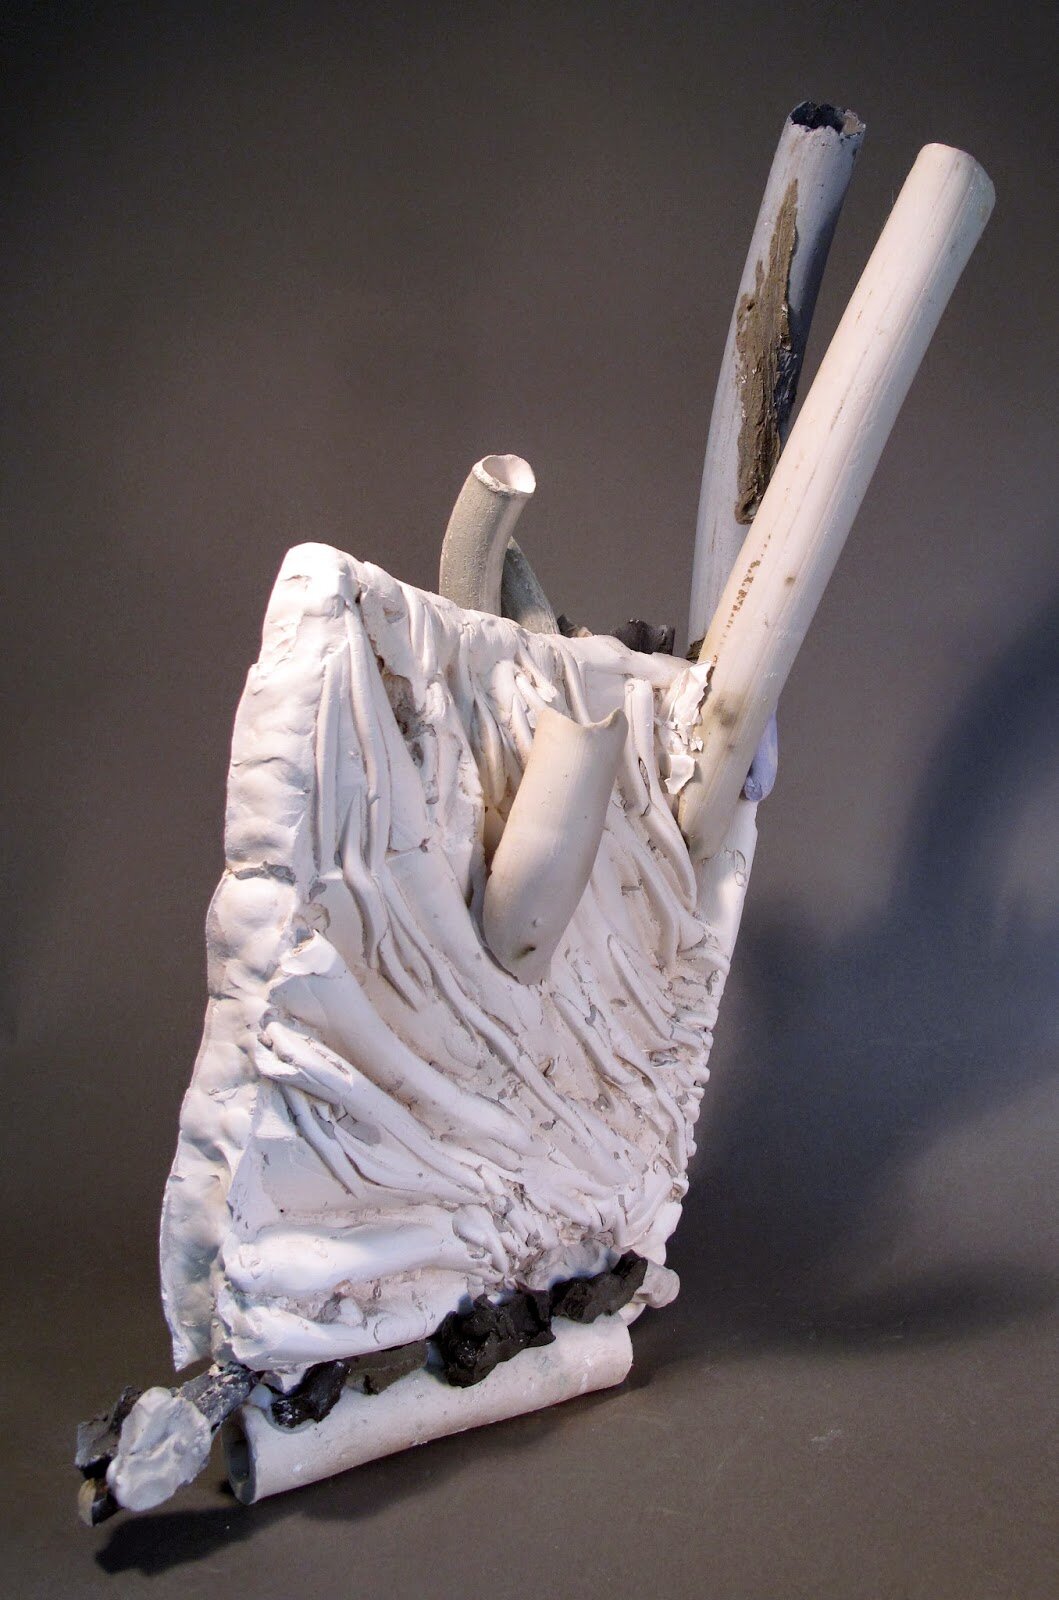  Sara Fine-Wilson,  Up and Over (DETAIL),  Clay, Plaster, Metal, Found Objects, Silicone, 20x11x7 